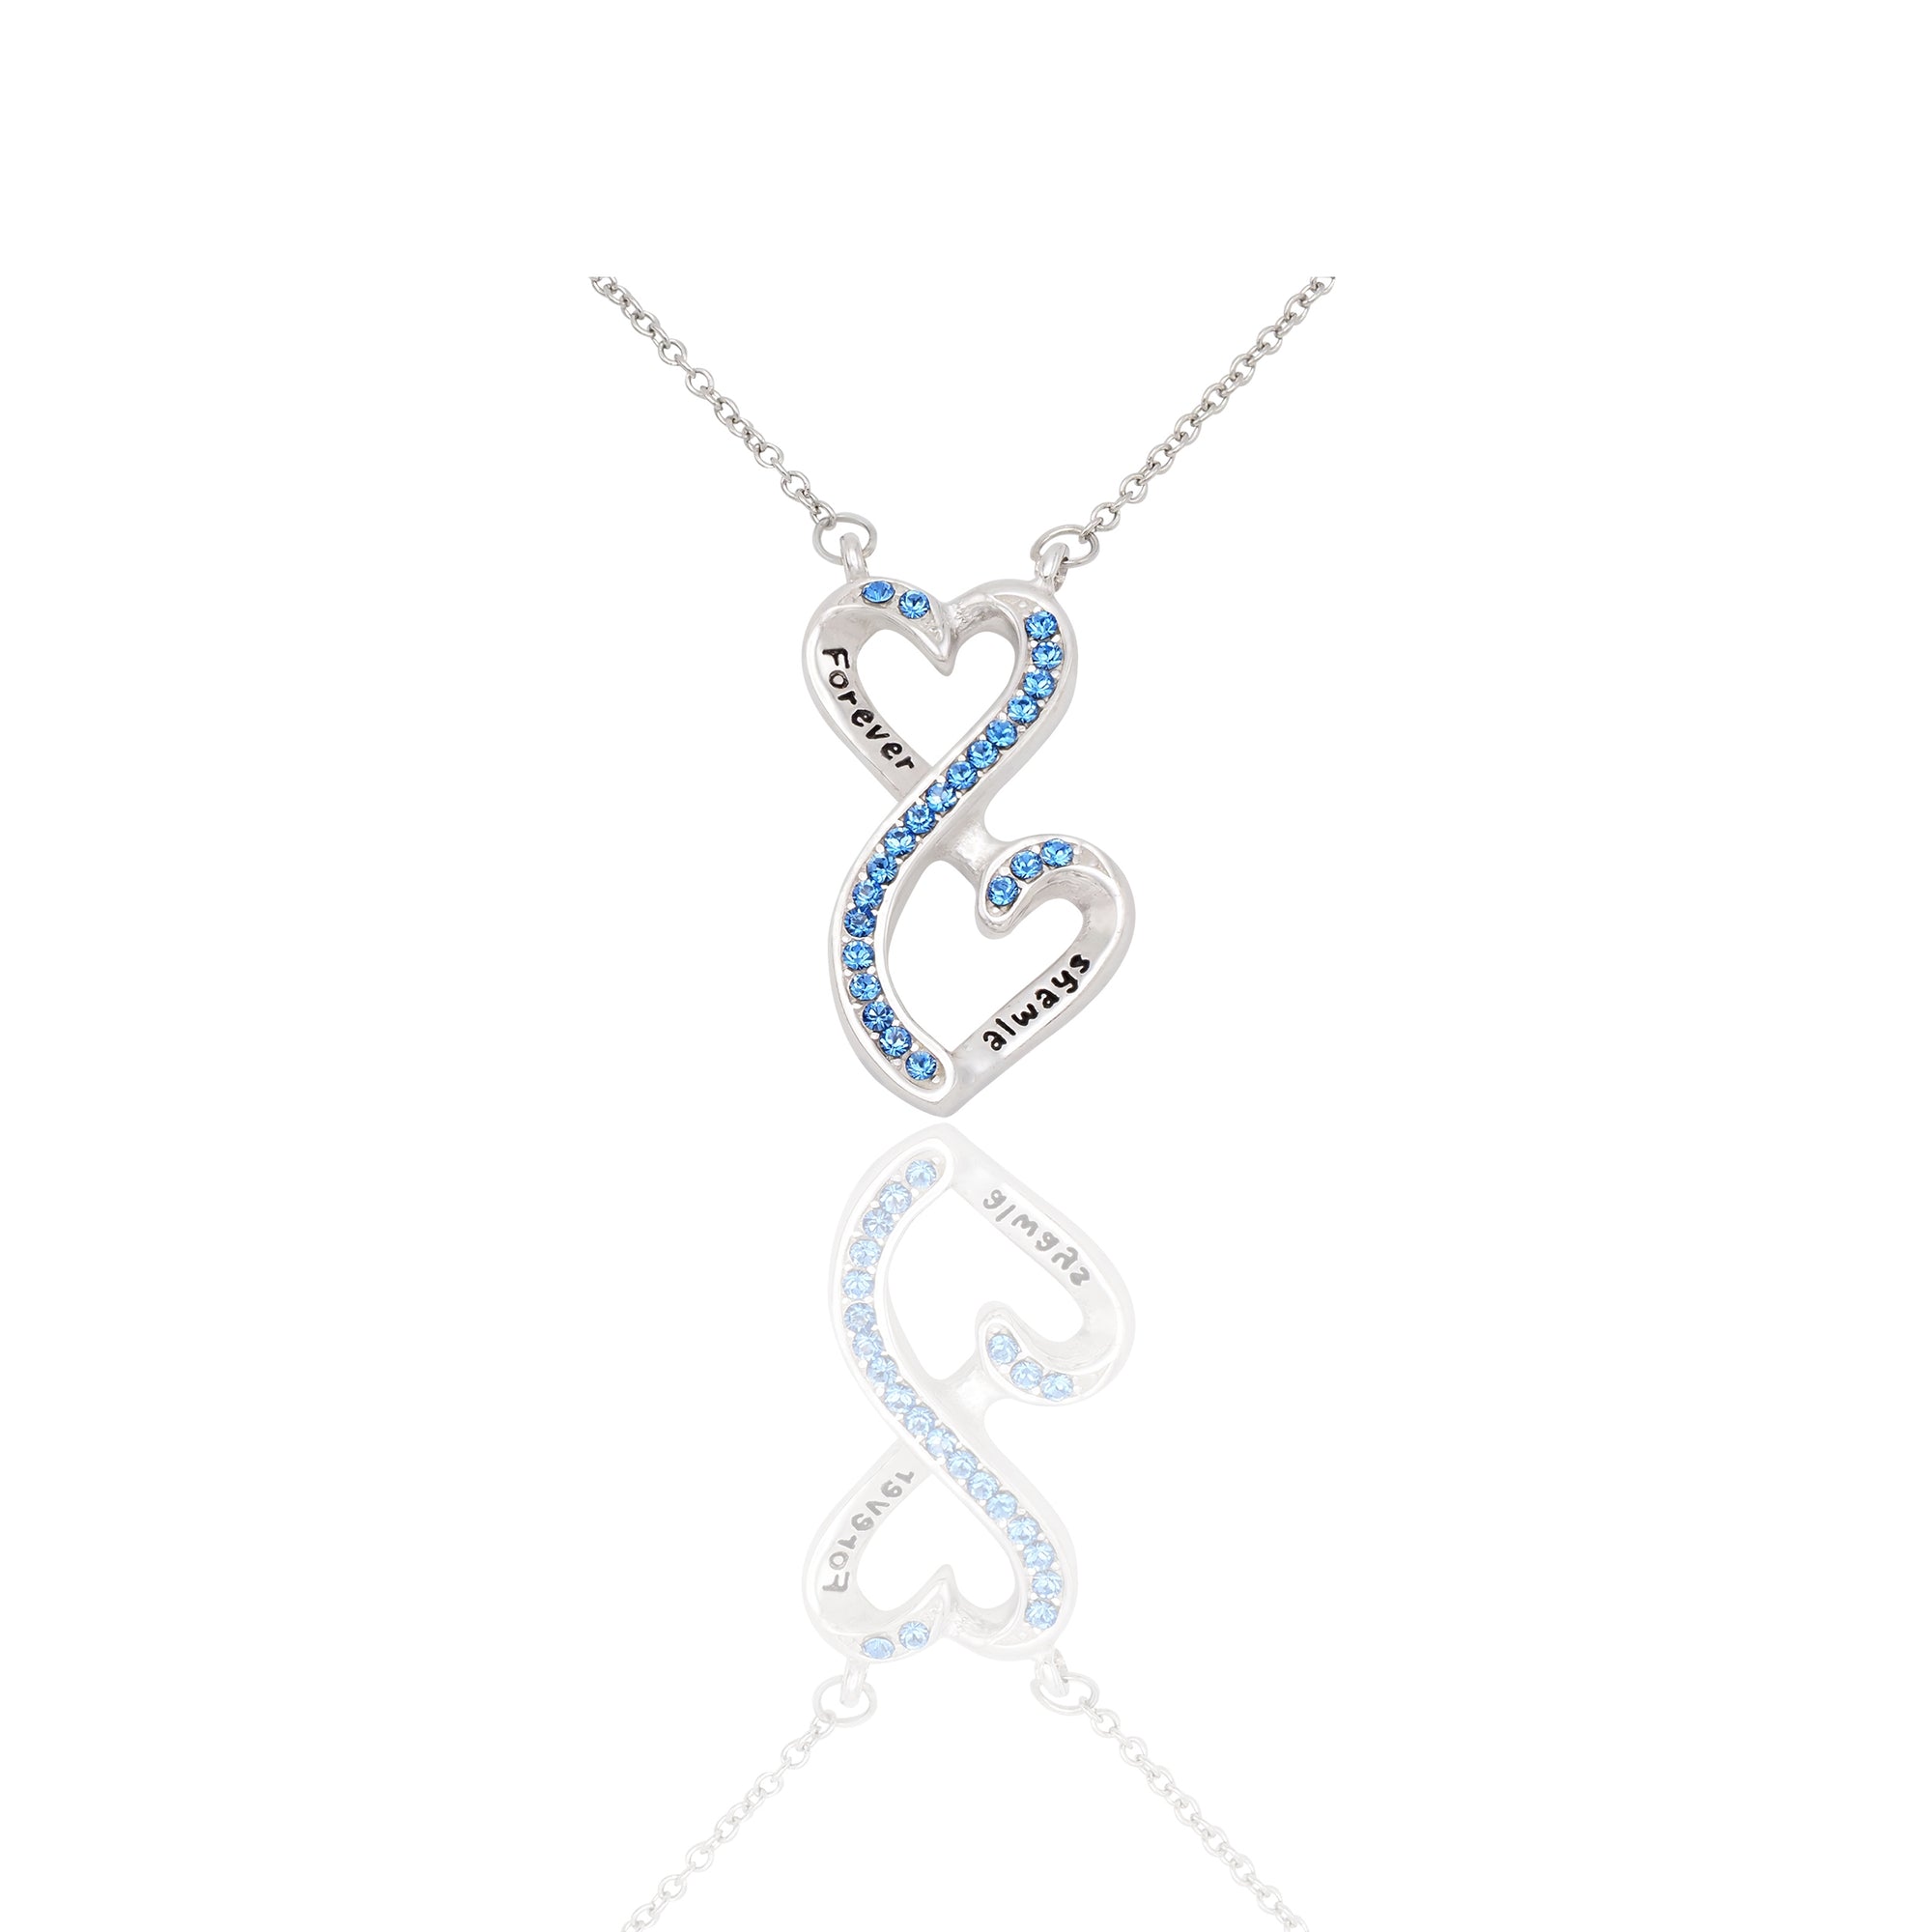 Yana 2 Infinity Hearts Pendant Necklace, Sisters Necklaces, Gifts for Sister Quotes Greeting Card